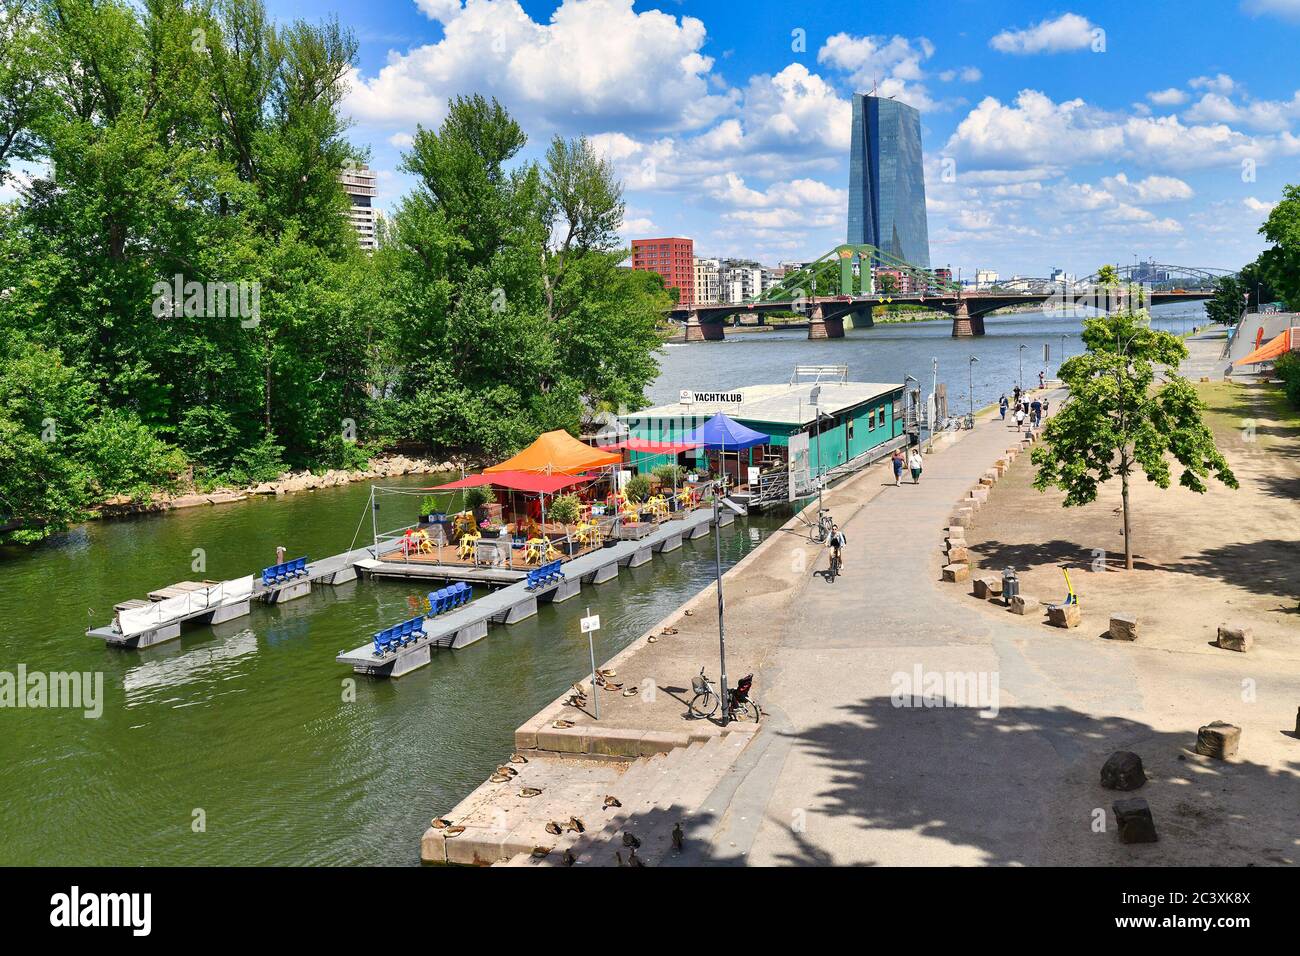 Frankfurt am Main, Germany - June 2020: Swimming restaurant on boat called 'Yachtclub' on Main river in Frankfurt on sunny day with skyscrapers Stock Photo